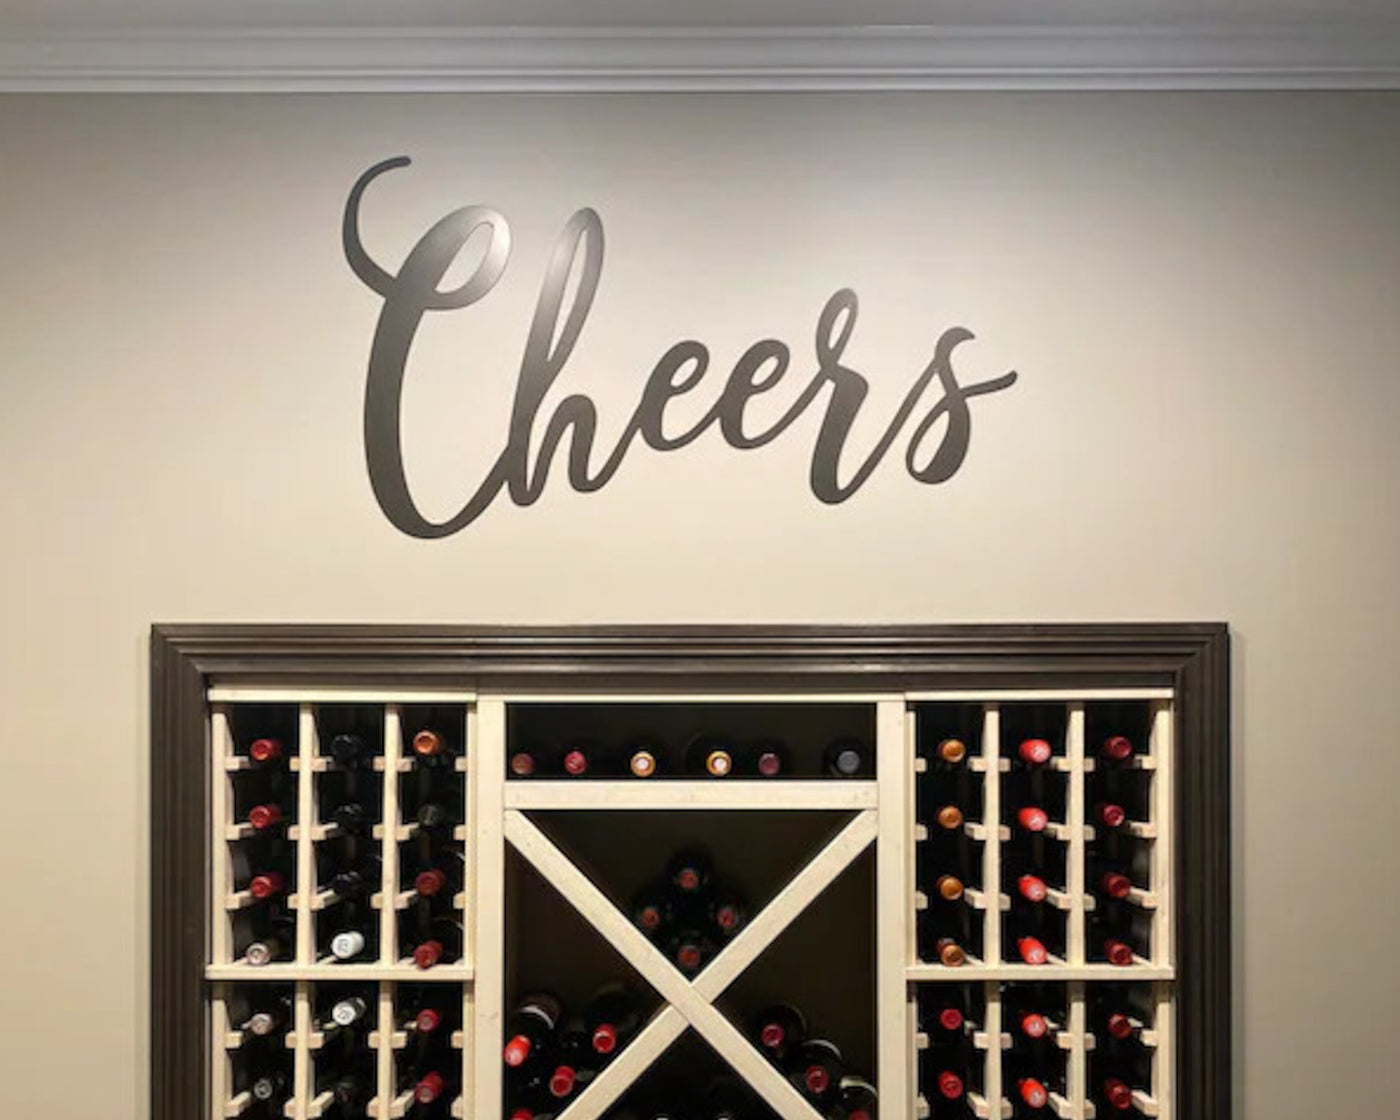 Cheers Metal Word Sign - Madison Iron and Wood - Wall Art - metal outdoor decor - Steel deocrations - american made products - veteran owned business products - fencing decorations - fencing supplies - custom wall decorations - personalized wall signs - steel - decorative post caps - steel post caps - metal post caps - brackets - structural brackets - home improvement - easter - easter decorations - easter gift - easter yard decor